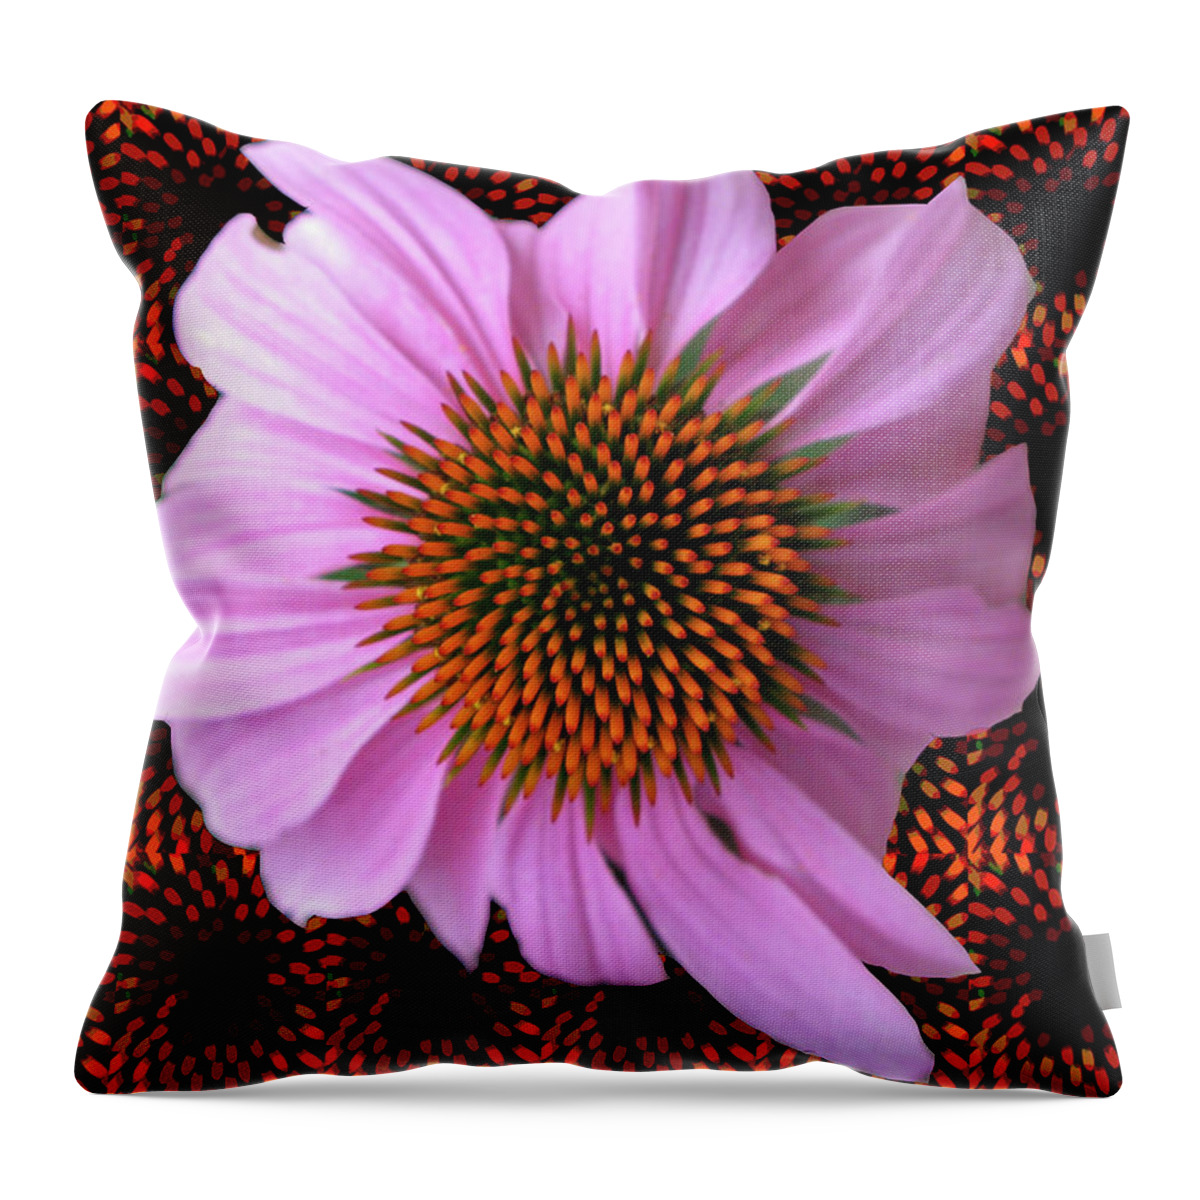 Bright Throw Pillow featuring the photograph Glow Petals by Rochelle Berman